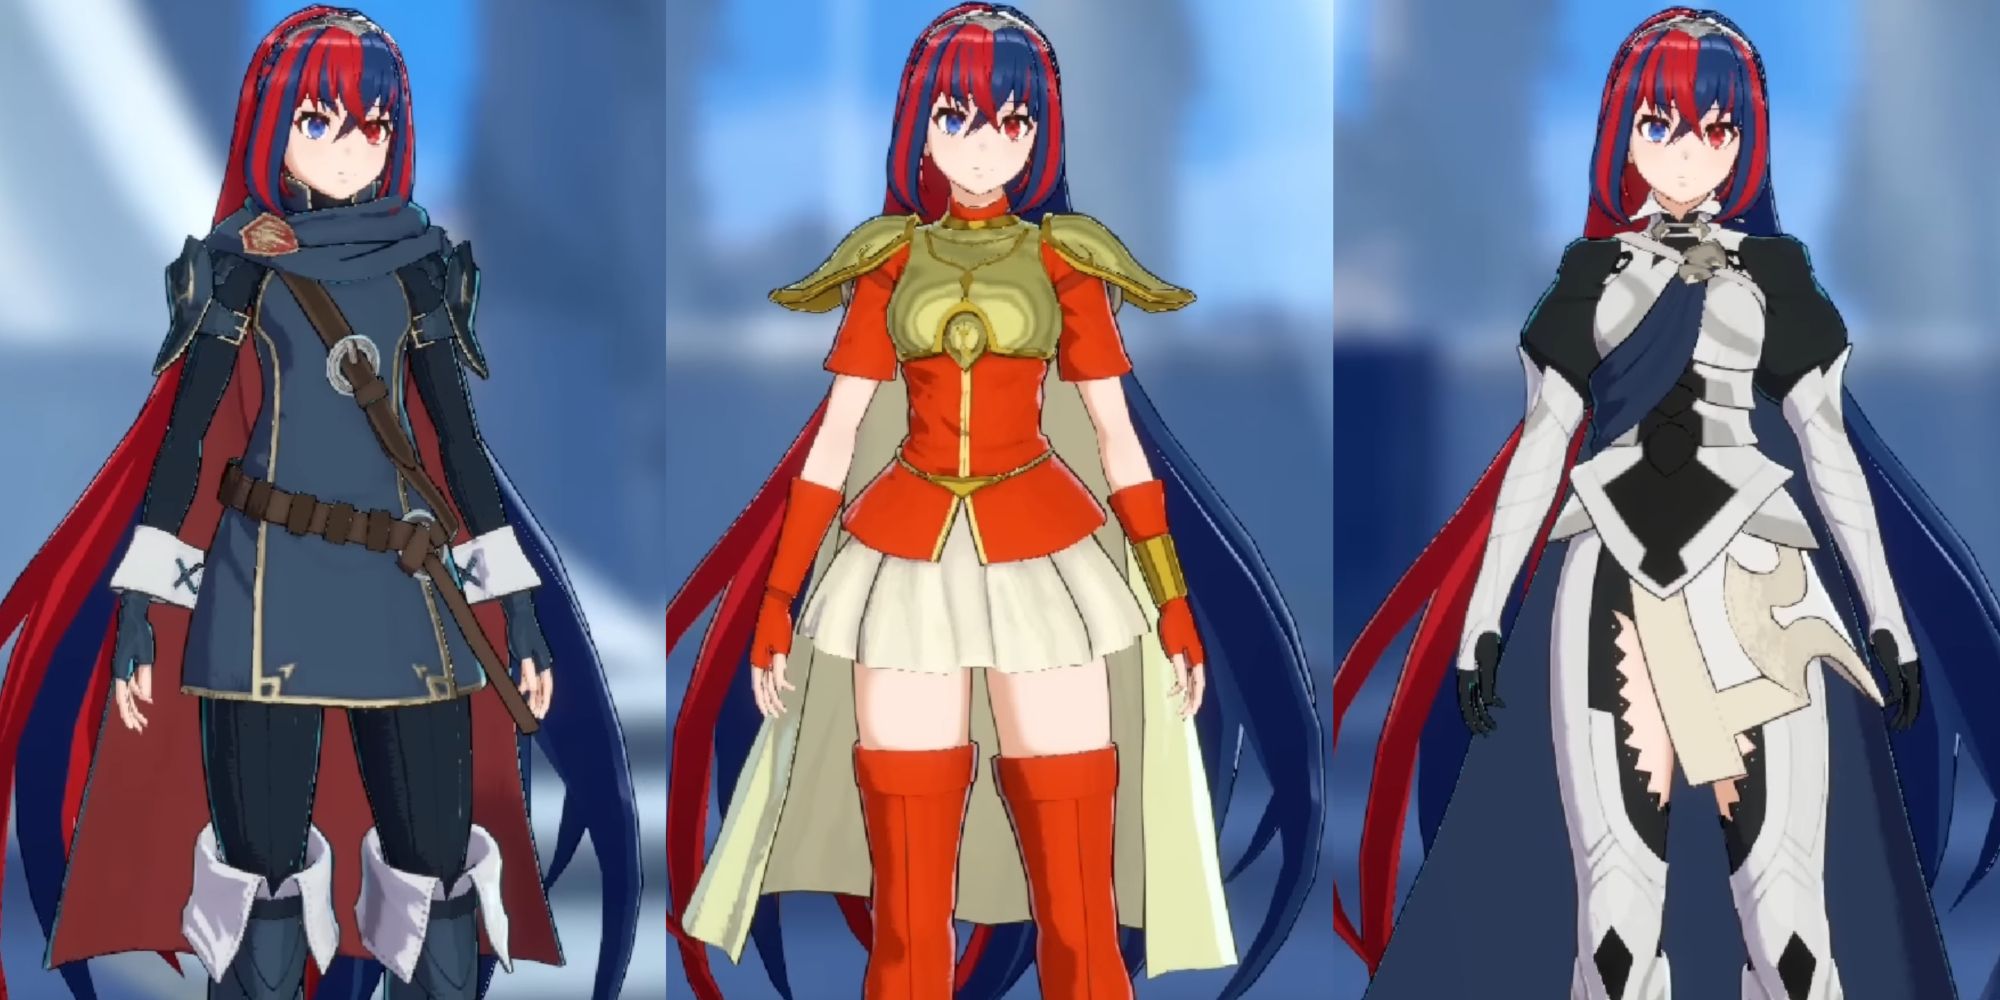 This image showcases Alear from Fire Emblem Engage wearing several character's Outfits from previous Fire Emblem titles. The left Outfit is Lucina, the Middle is Eirika, and the right is Corrin.